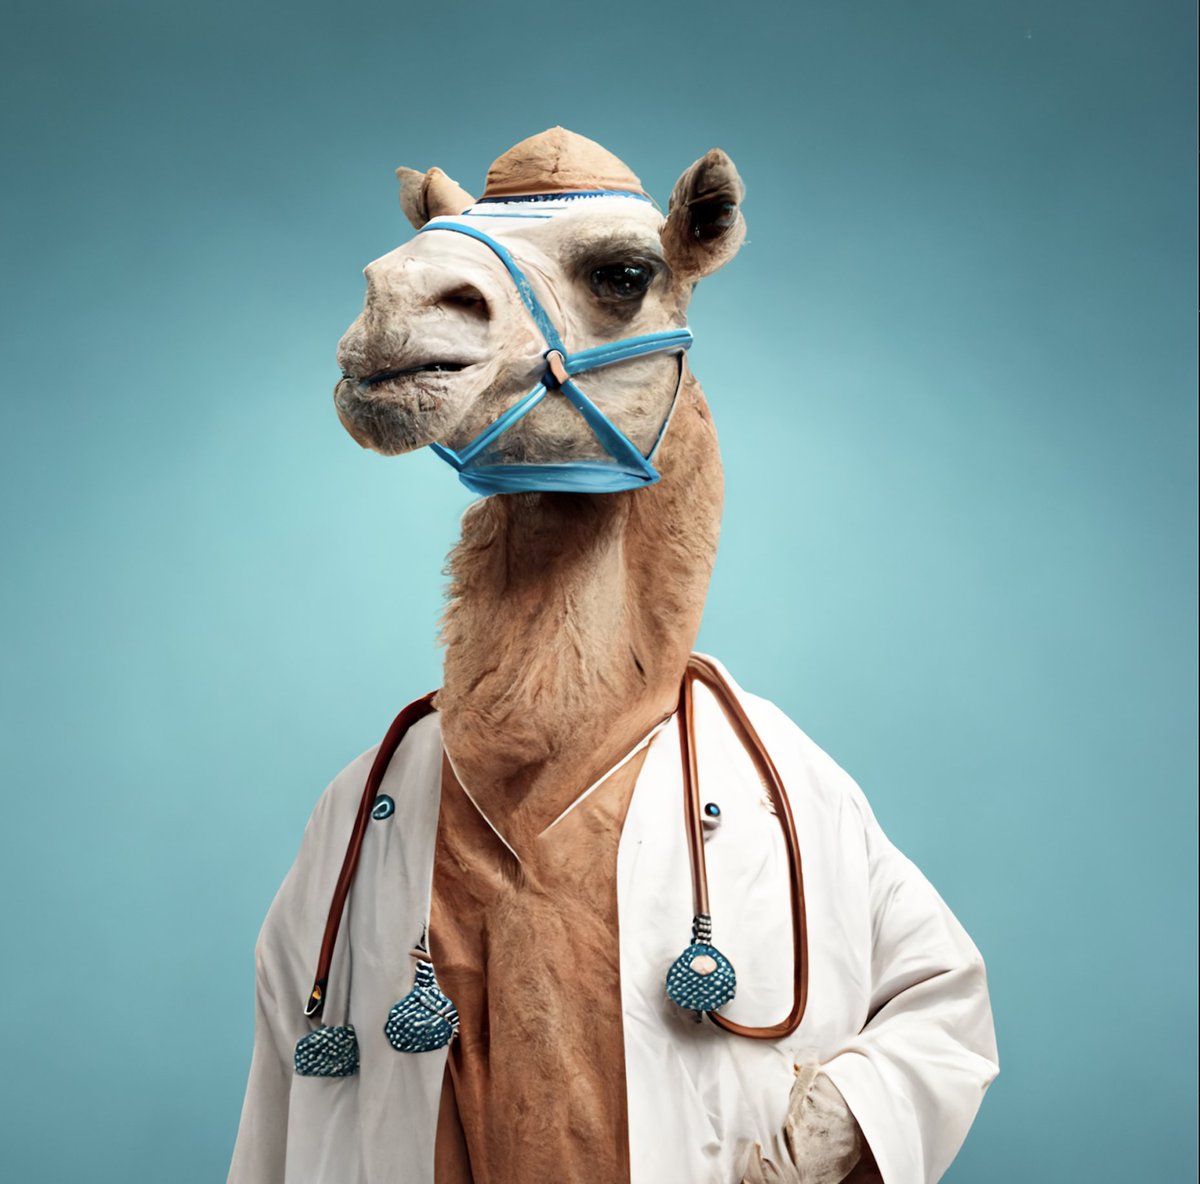 Thanks @AIatMeta for properly putting our clinical camel on the map of medical LLMs. We are proud to be one of the earliest open-source medical LLMs, laying the groundwork for many of the subsequent, more advanced LLMs in the field of medicine. More exciting development of…